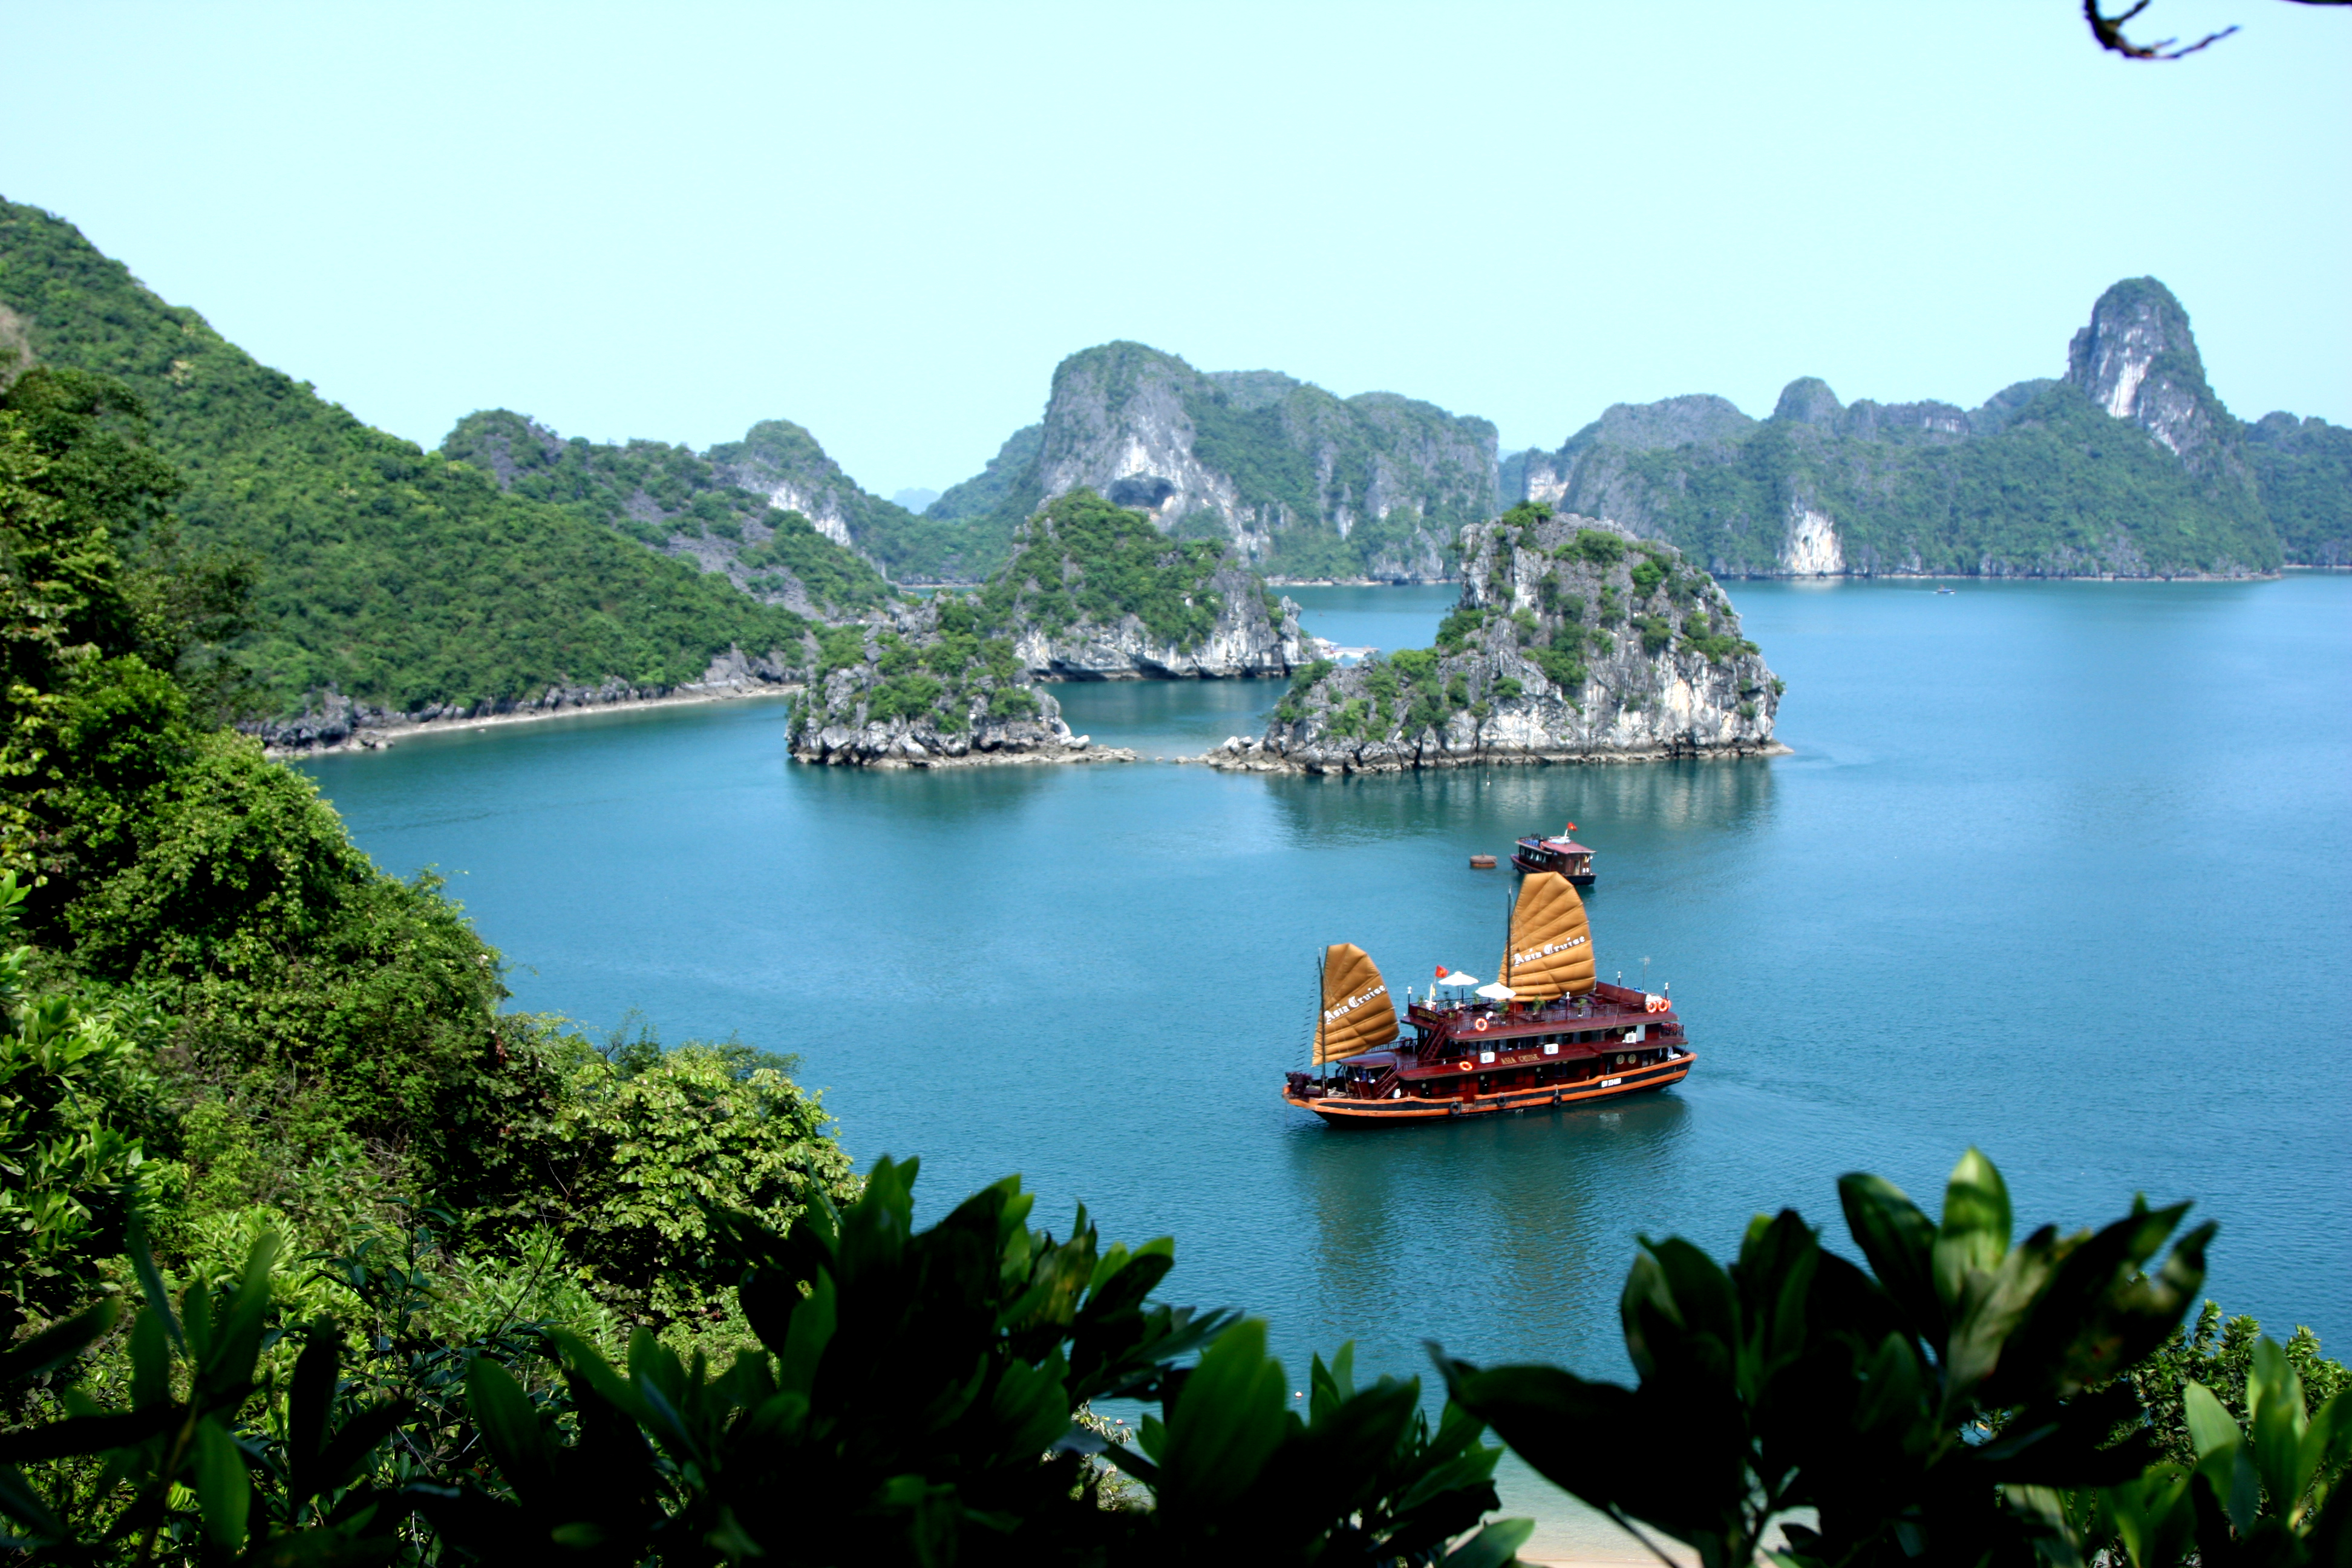 When to go and how to visit Halong Bay